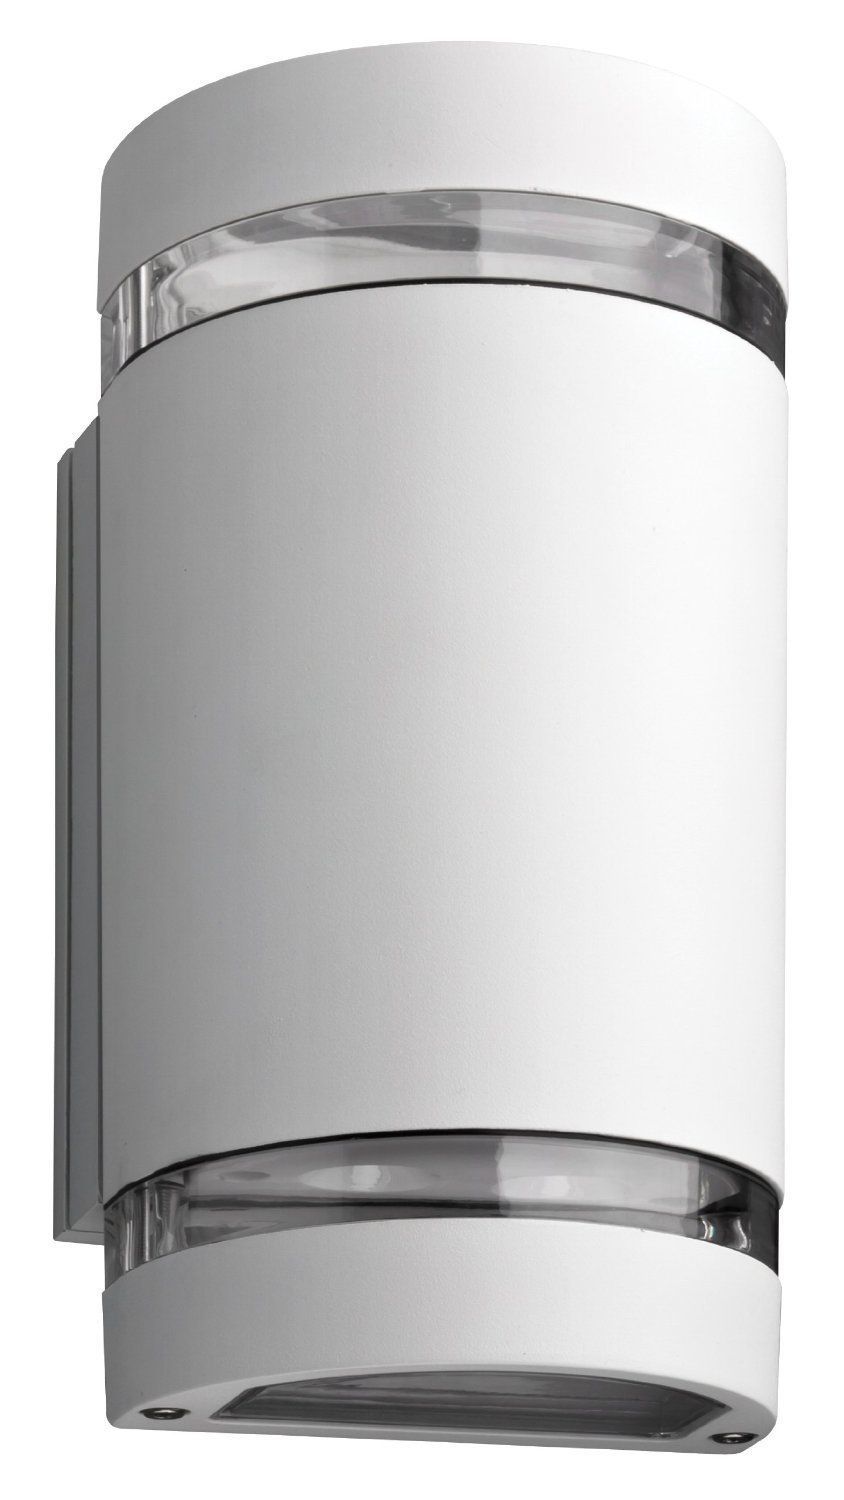 Lithonia Lighting Ollwu Wh M6 Outdoor Led Wall Cylinder 2 Light Up Regarding Outdoor Wall Lighting At Amazon (View 8 of 15)